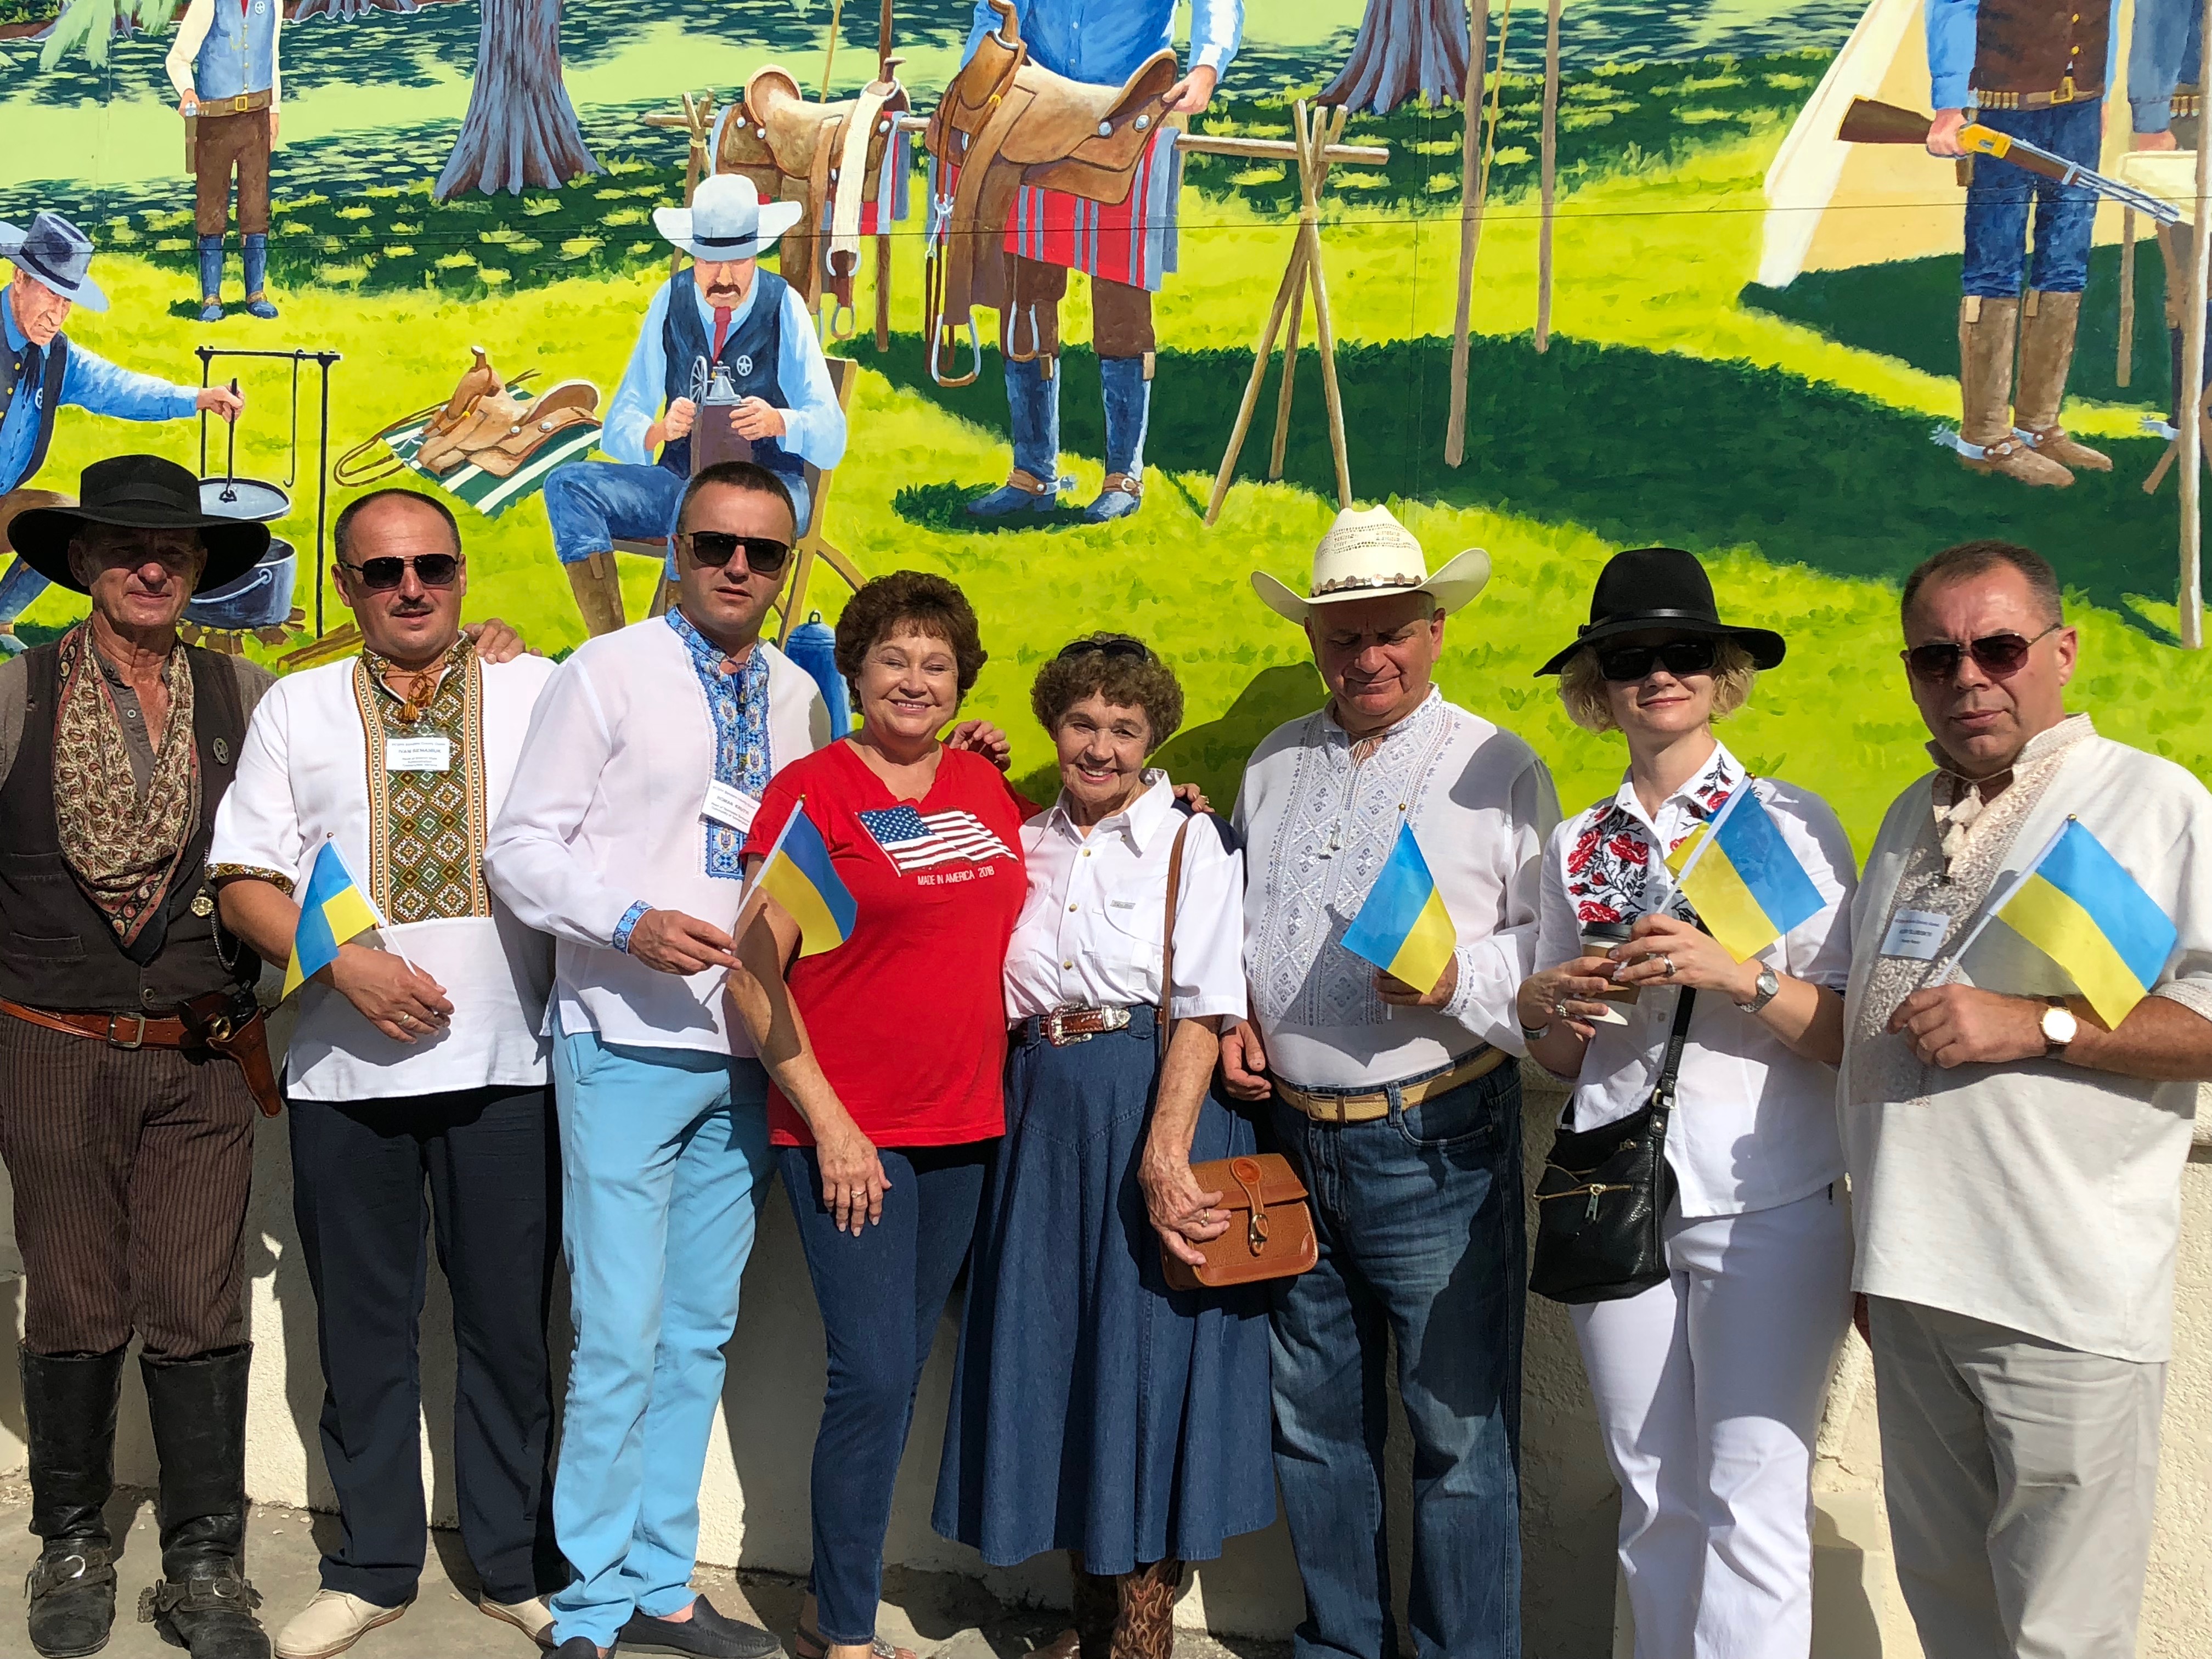 Delegation and volunteers pose in front of a mural